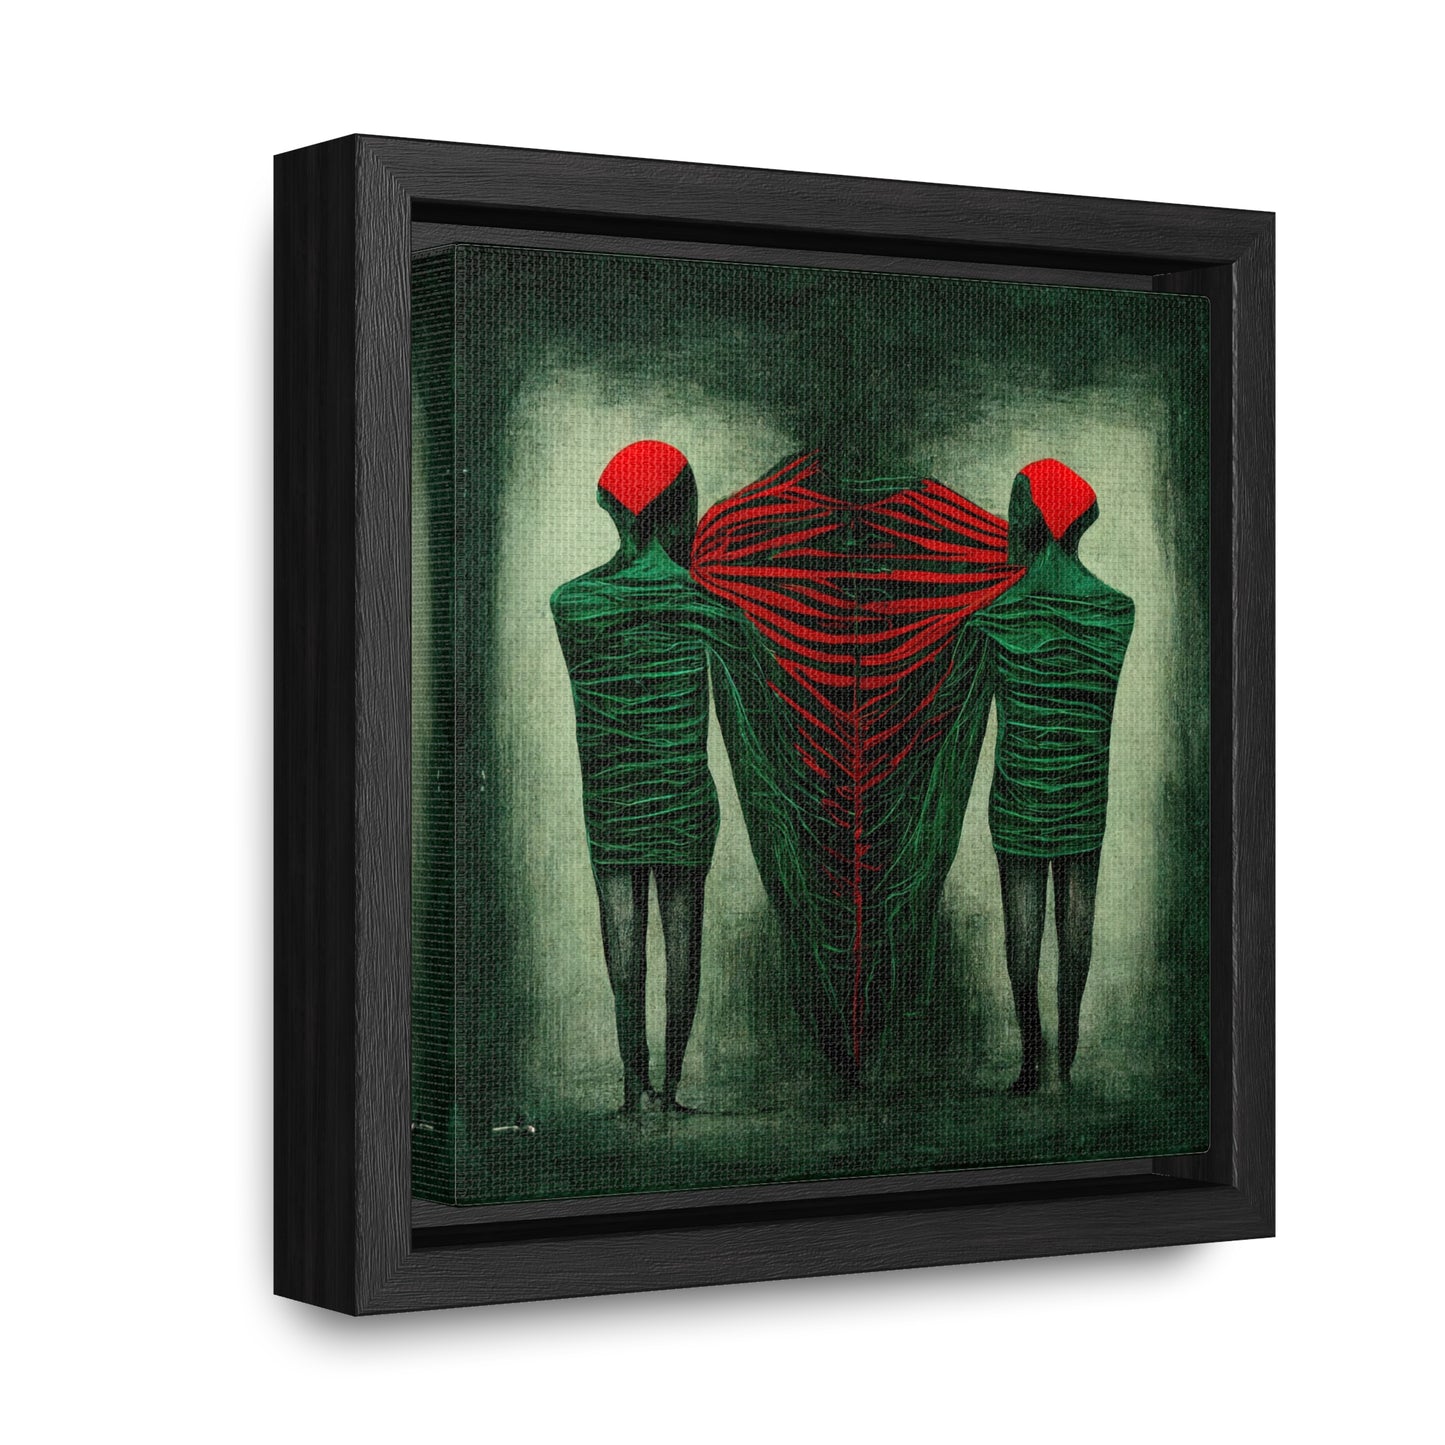 Loneliness Green Red 7, Valentinii, Gallery Canvas Wraps, Square Frame